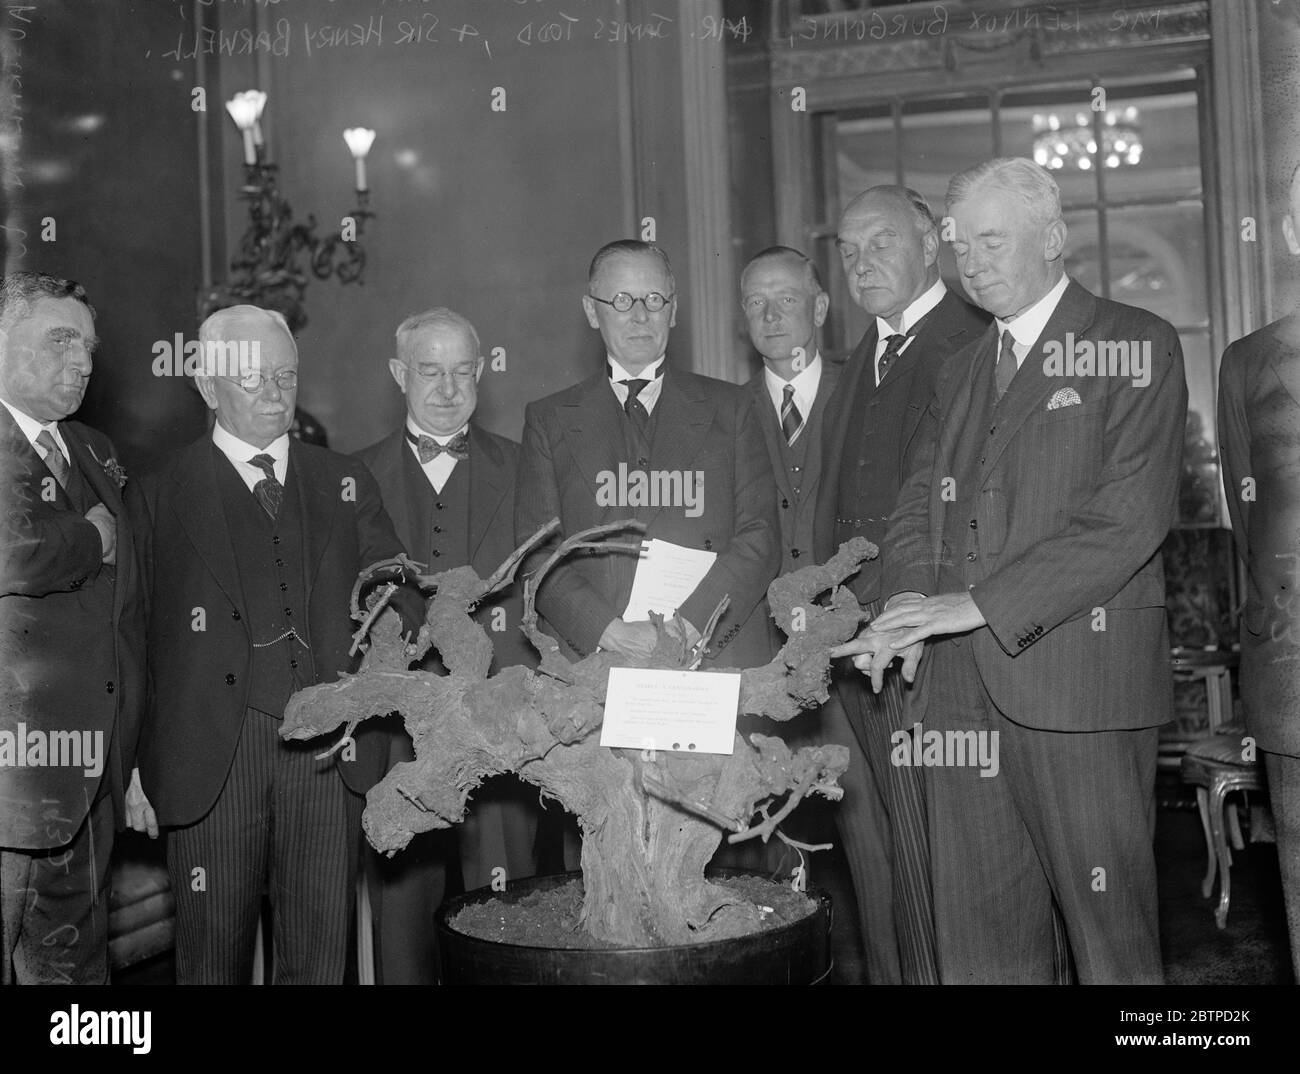 Australian Wine Centenary . Left to right : The Hon W C Angwin , Mr J R Collins , Mr Cuthbert Burgoyne , Mr Lennox Burgoyne , Mr James Todd and Sir Henry Barwell KCMG with the original cutting which has been sent back to London for the centenary celebration at the Savoy Hotel . 24 August 1932 Stock Photo